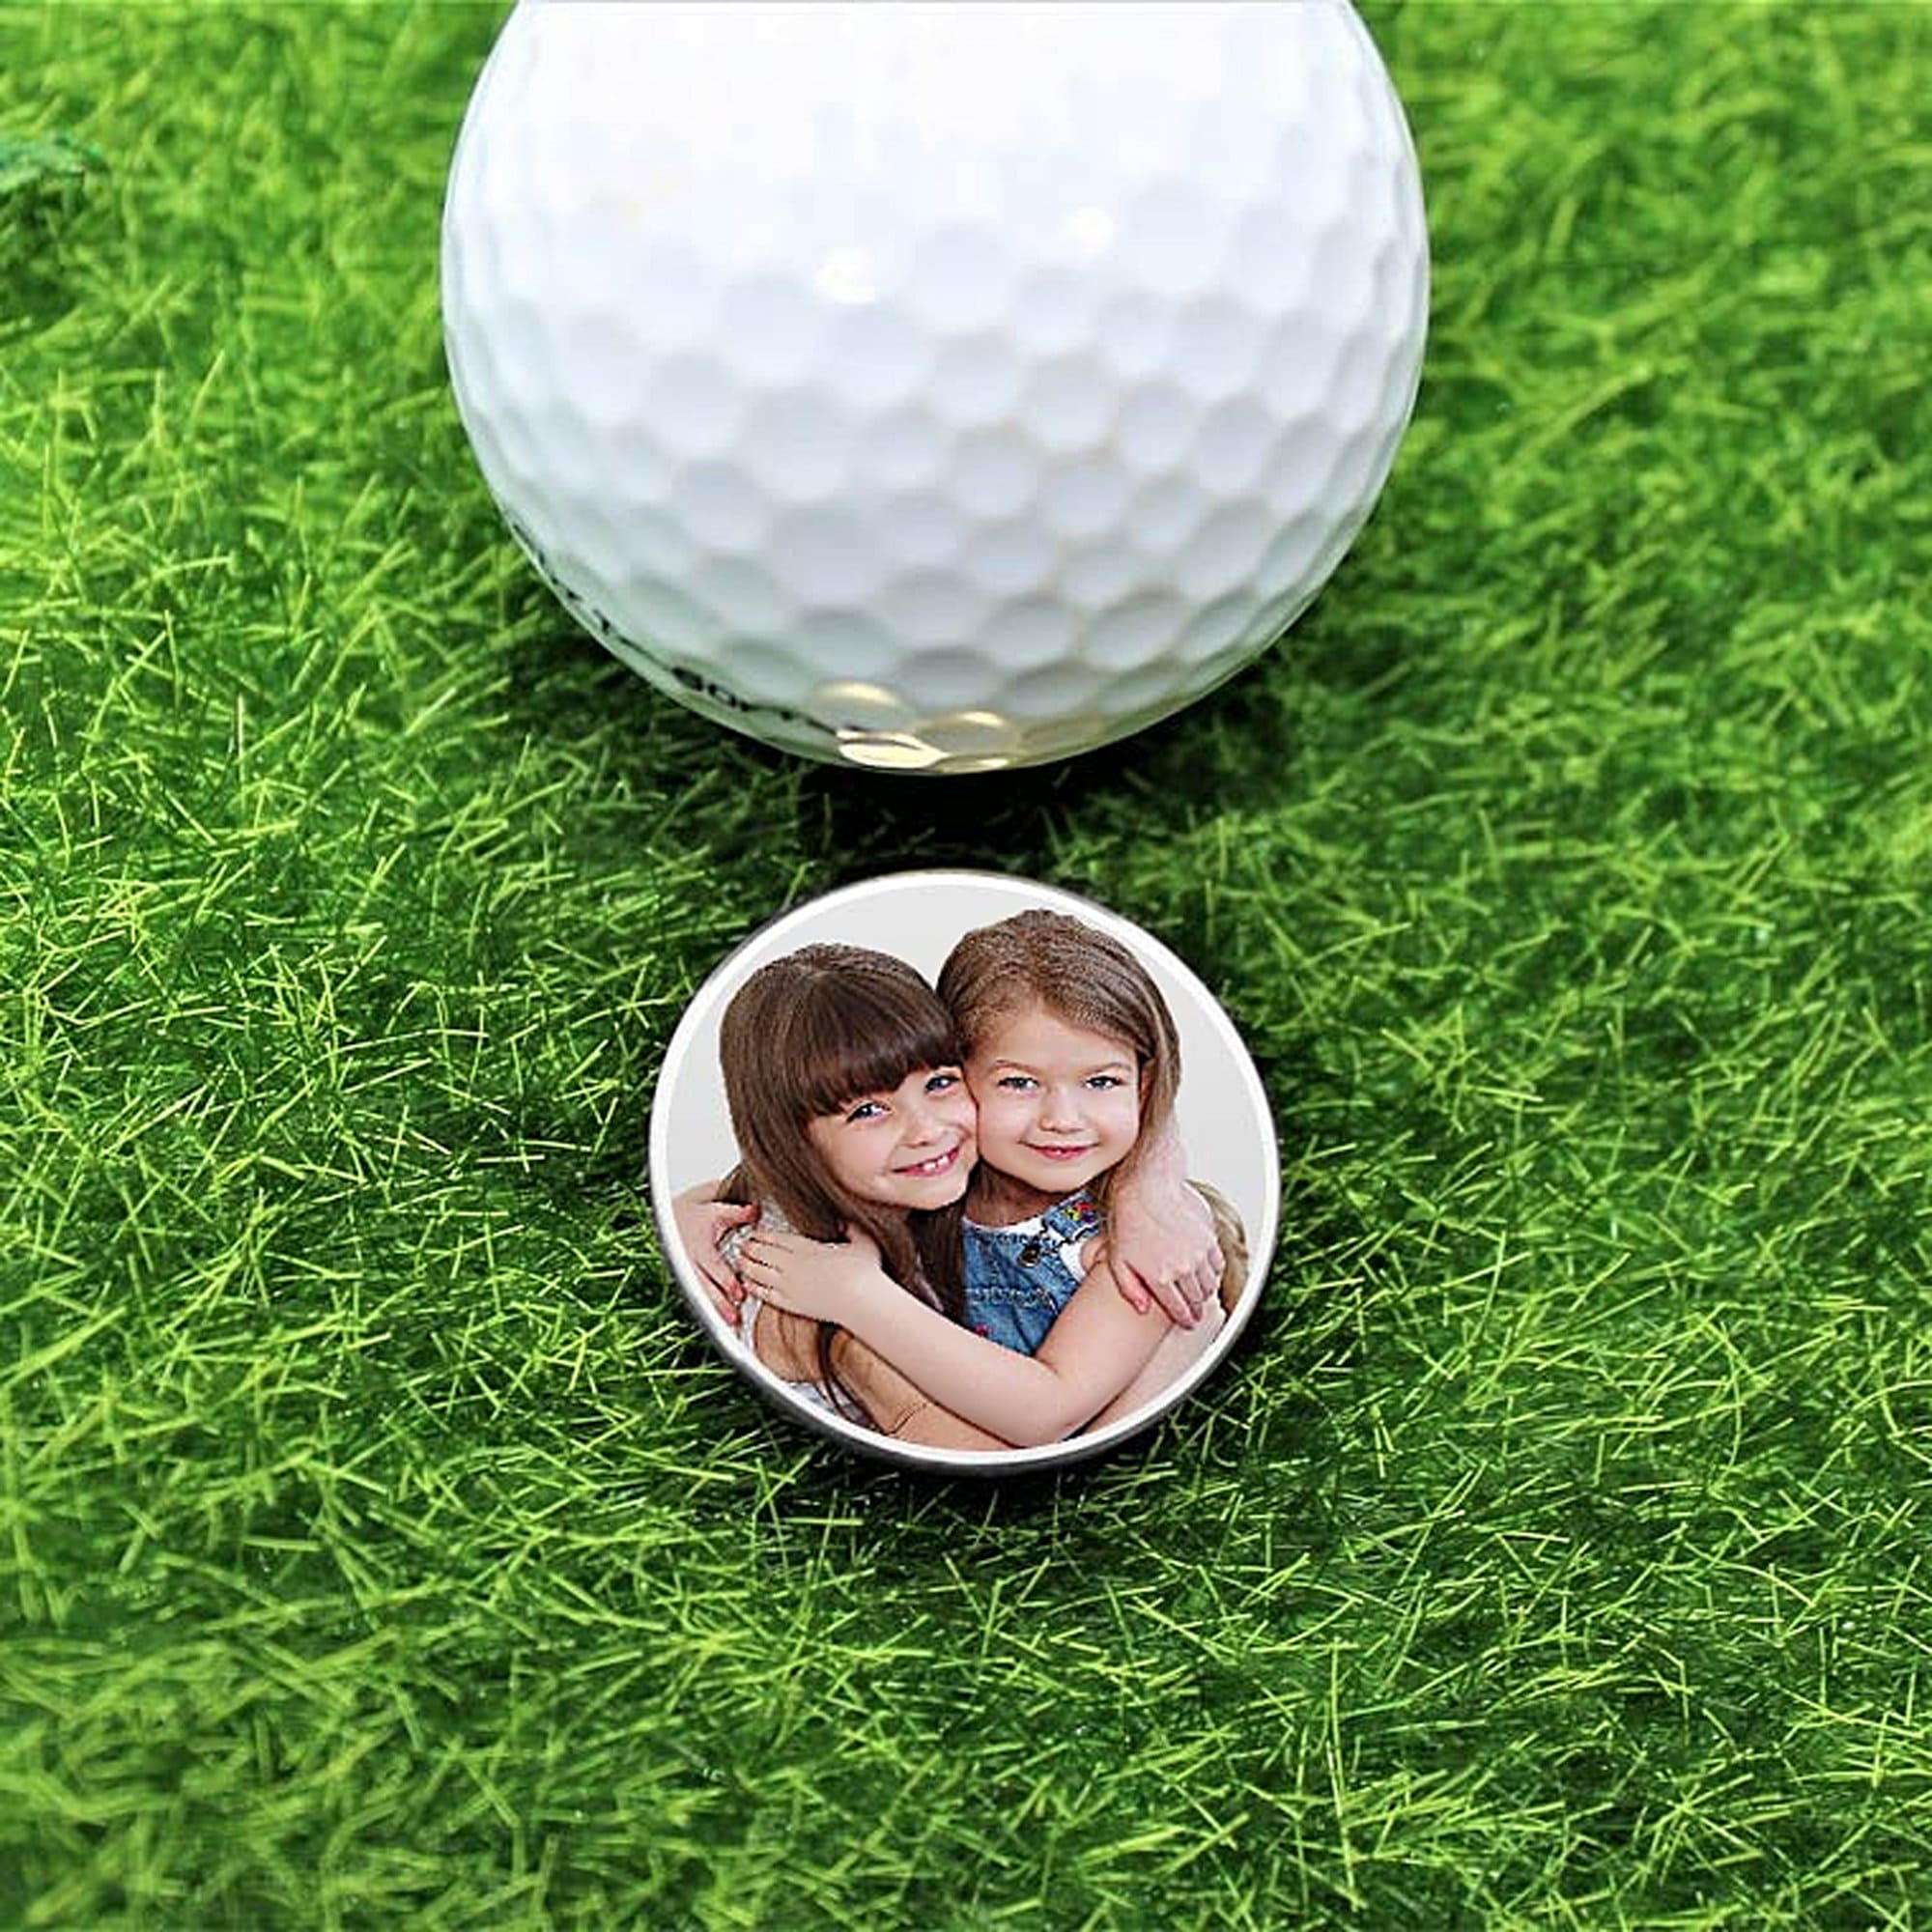  Personalized Image Golf Gift for Men Dad Husband Boss Golfer,  Custom Photo Name Golf Ball Display with Luxury Box, Golf Accessories for  Men, Funny Golf Gift for Men, Anniversary, Birthday, Christmas 